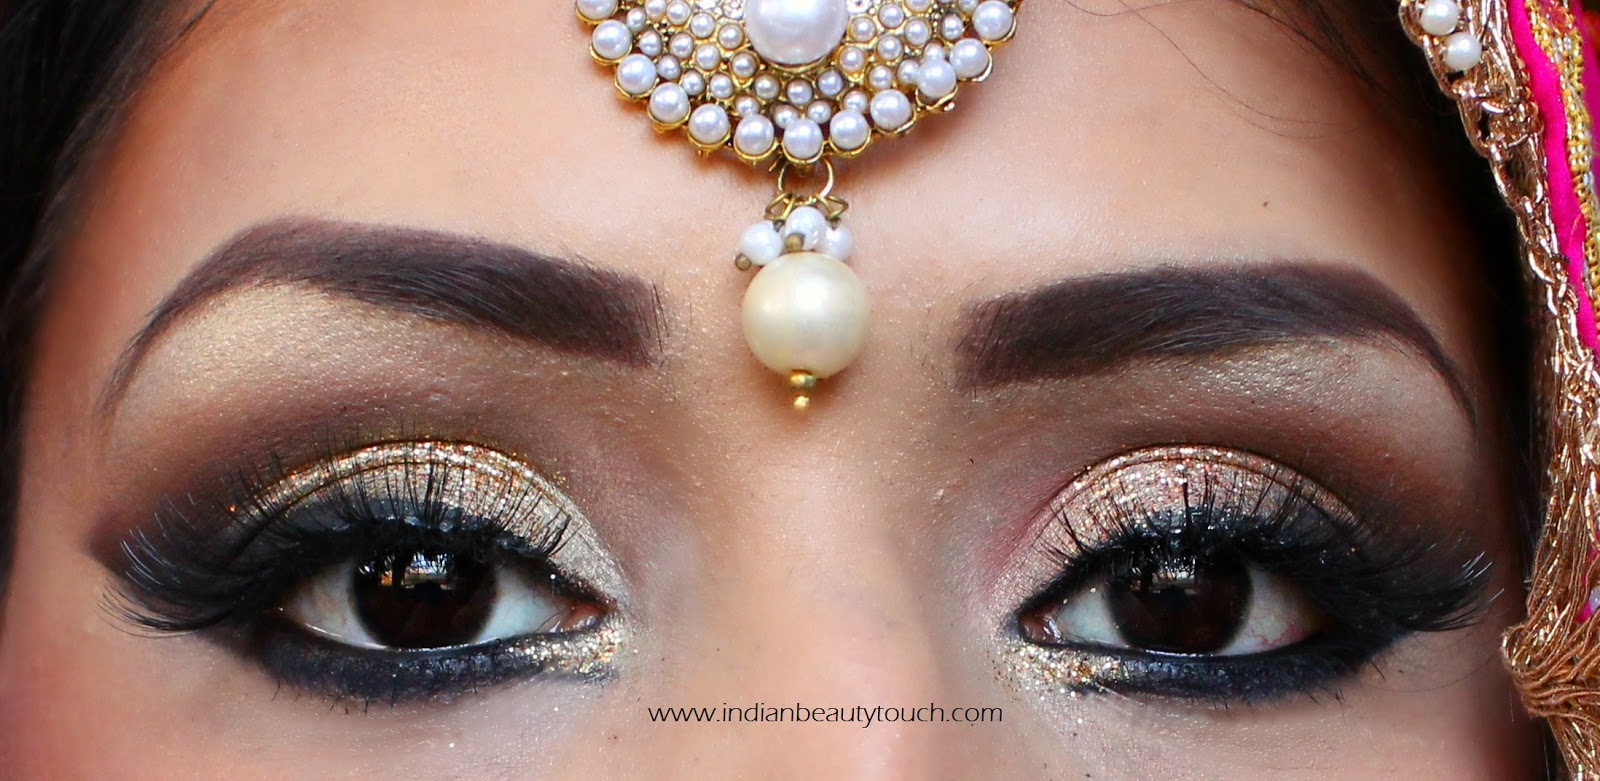 Indian Eye Makeup How To Do Indian Bridal Eye Makeup Indian Beauty Touch